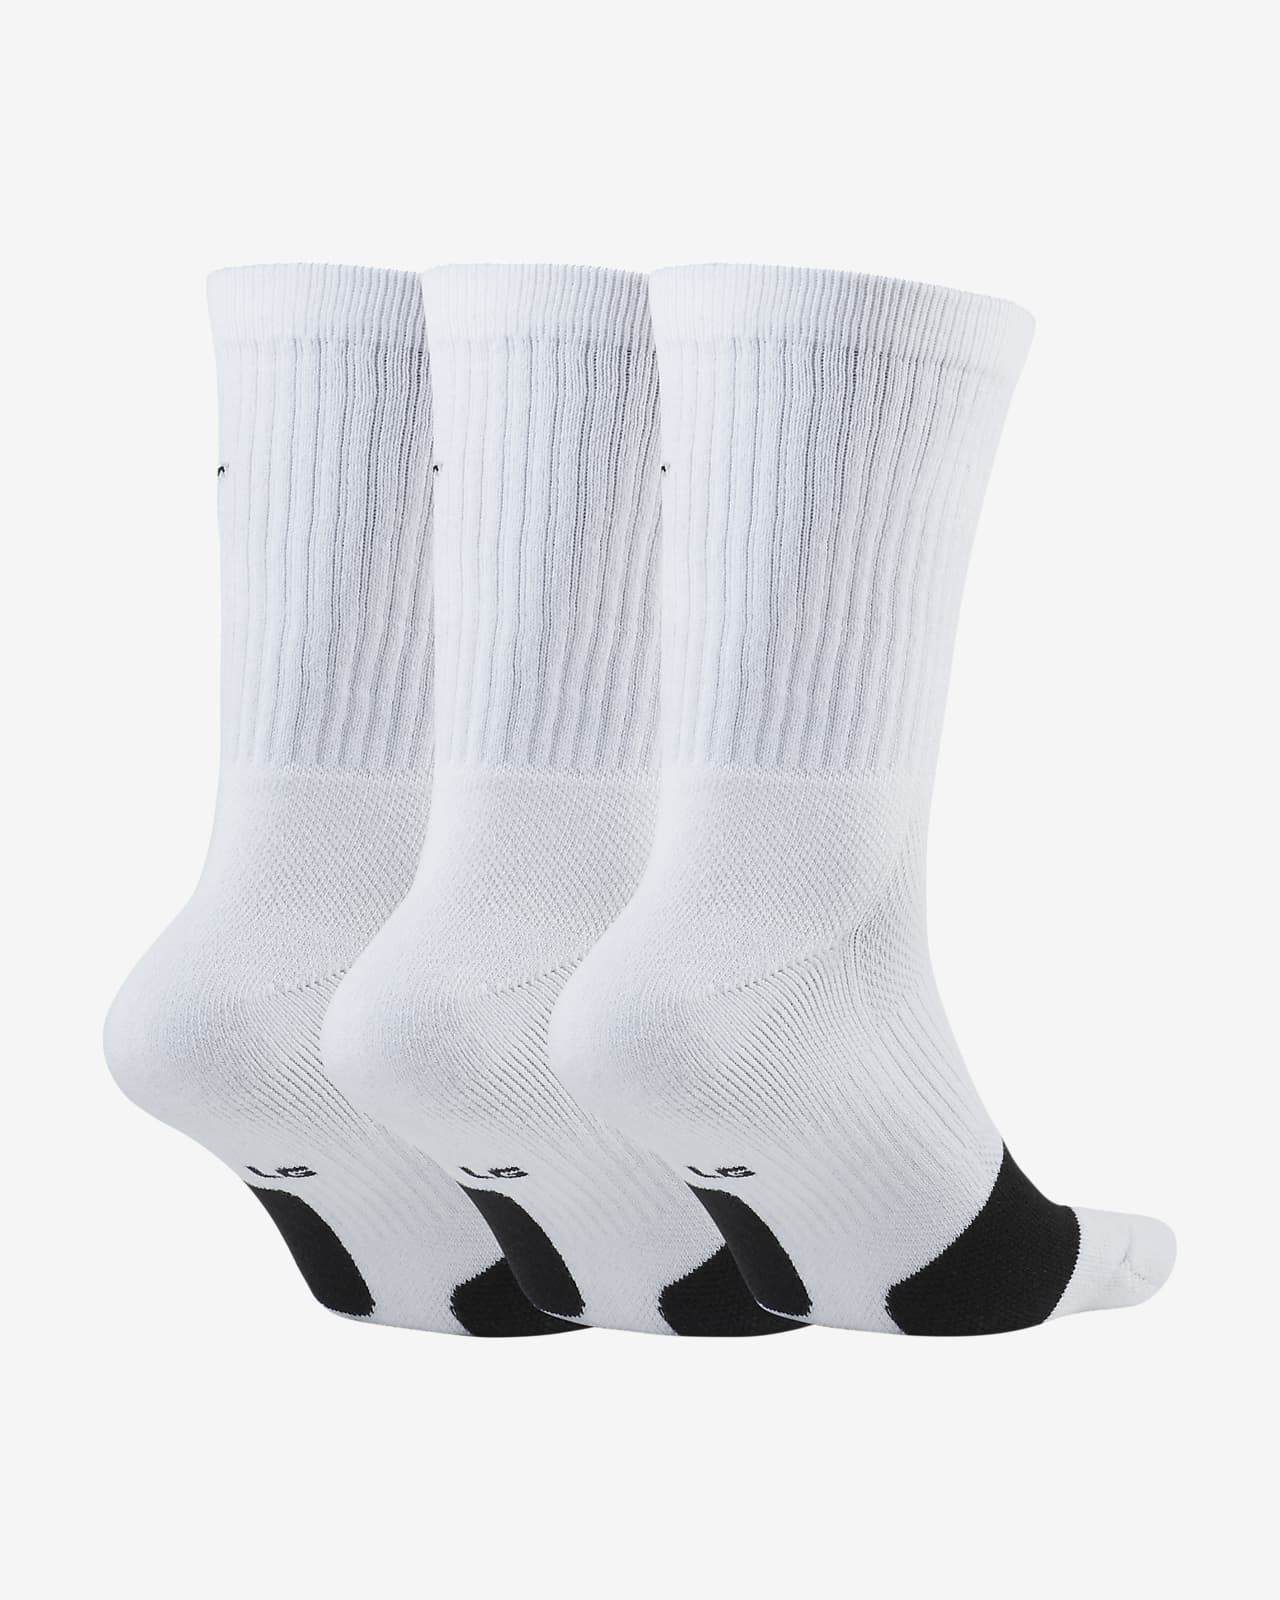 Nike Chaussettes pack 3